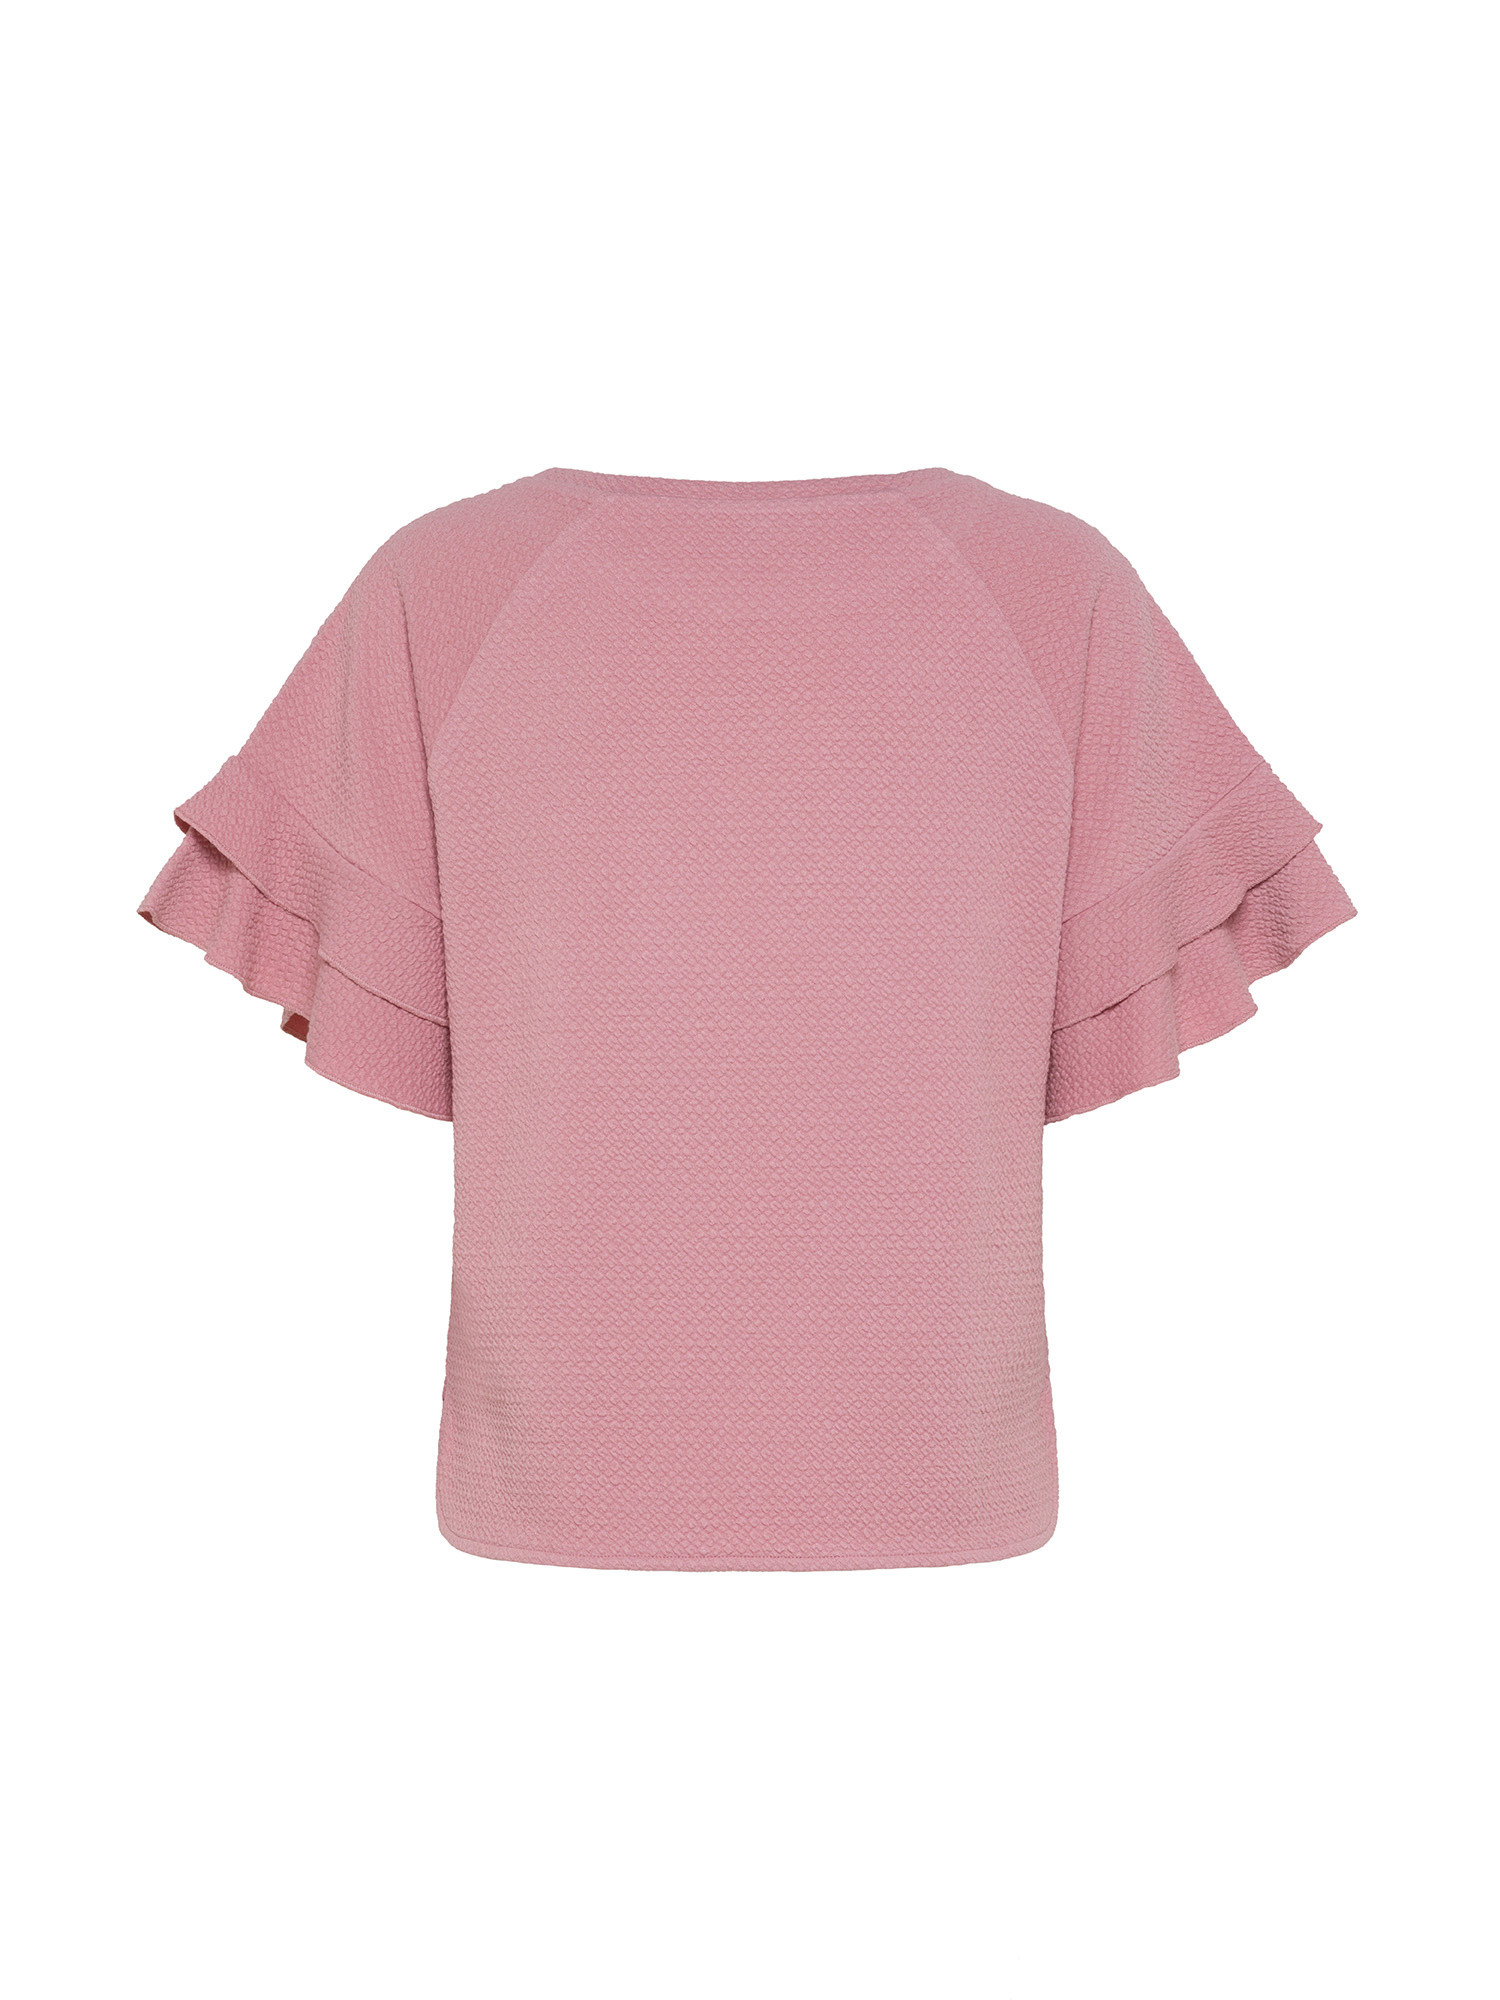 Koan - T-shirt with ruffles, Pink, large image number 1